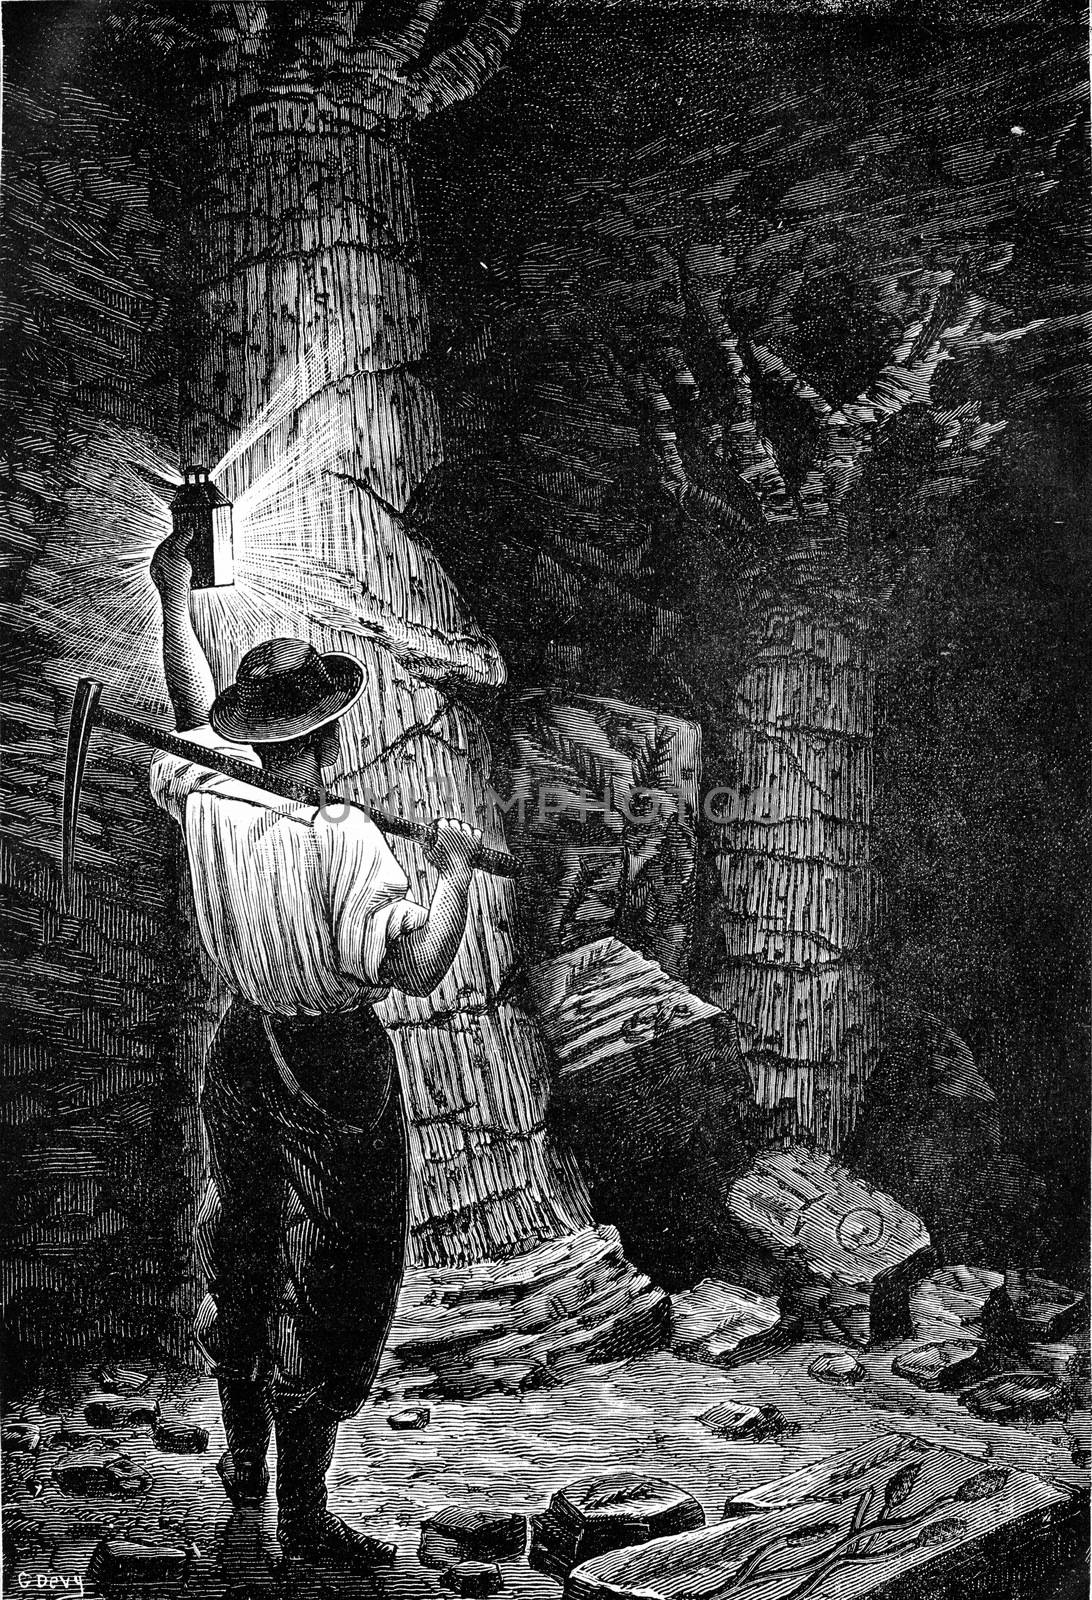 To his deep mines, the coal miner meeting with astonishment vicilles buried forest, vintage engraved illustration. Earth before man – 1886.
